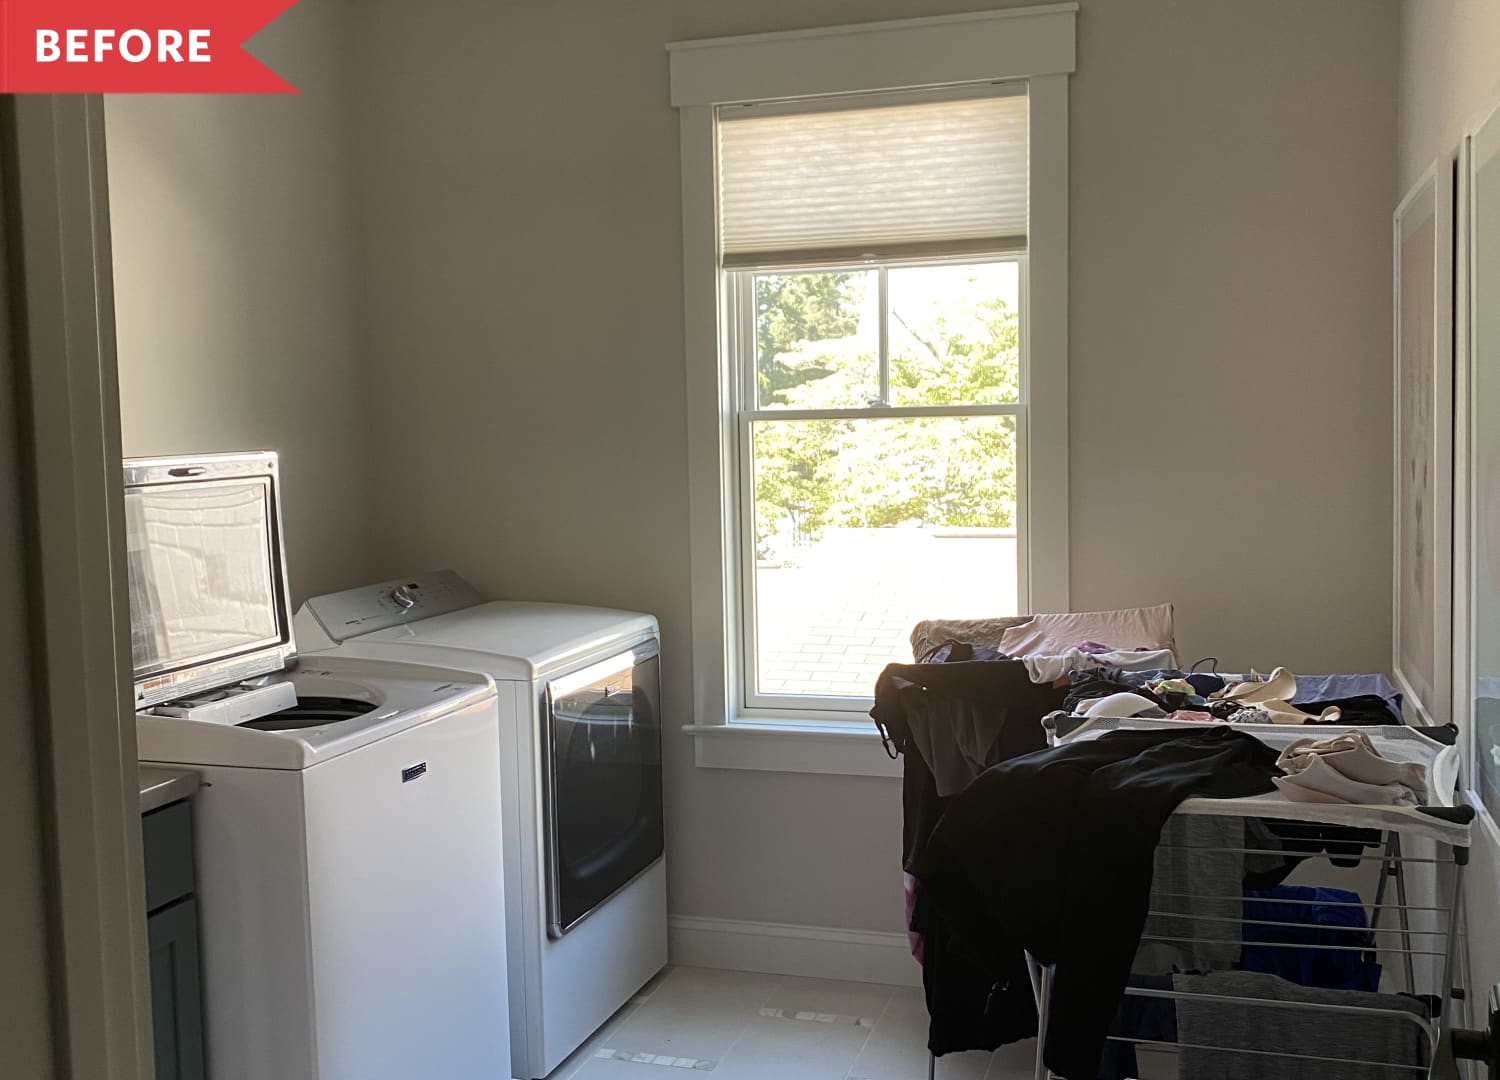 Before and After: Smart Yet Simple Swaps Make a “Dark and Drab” Laundry Room Feel Bigger and Brighter